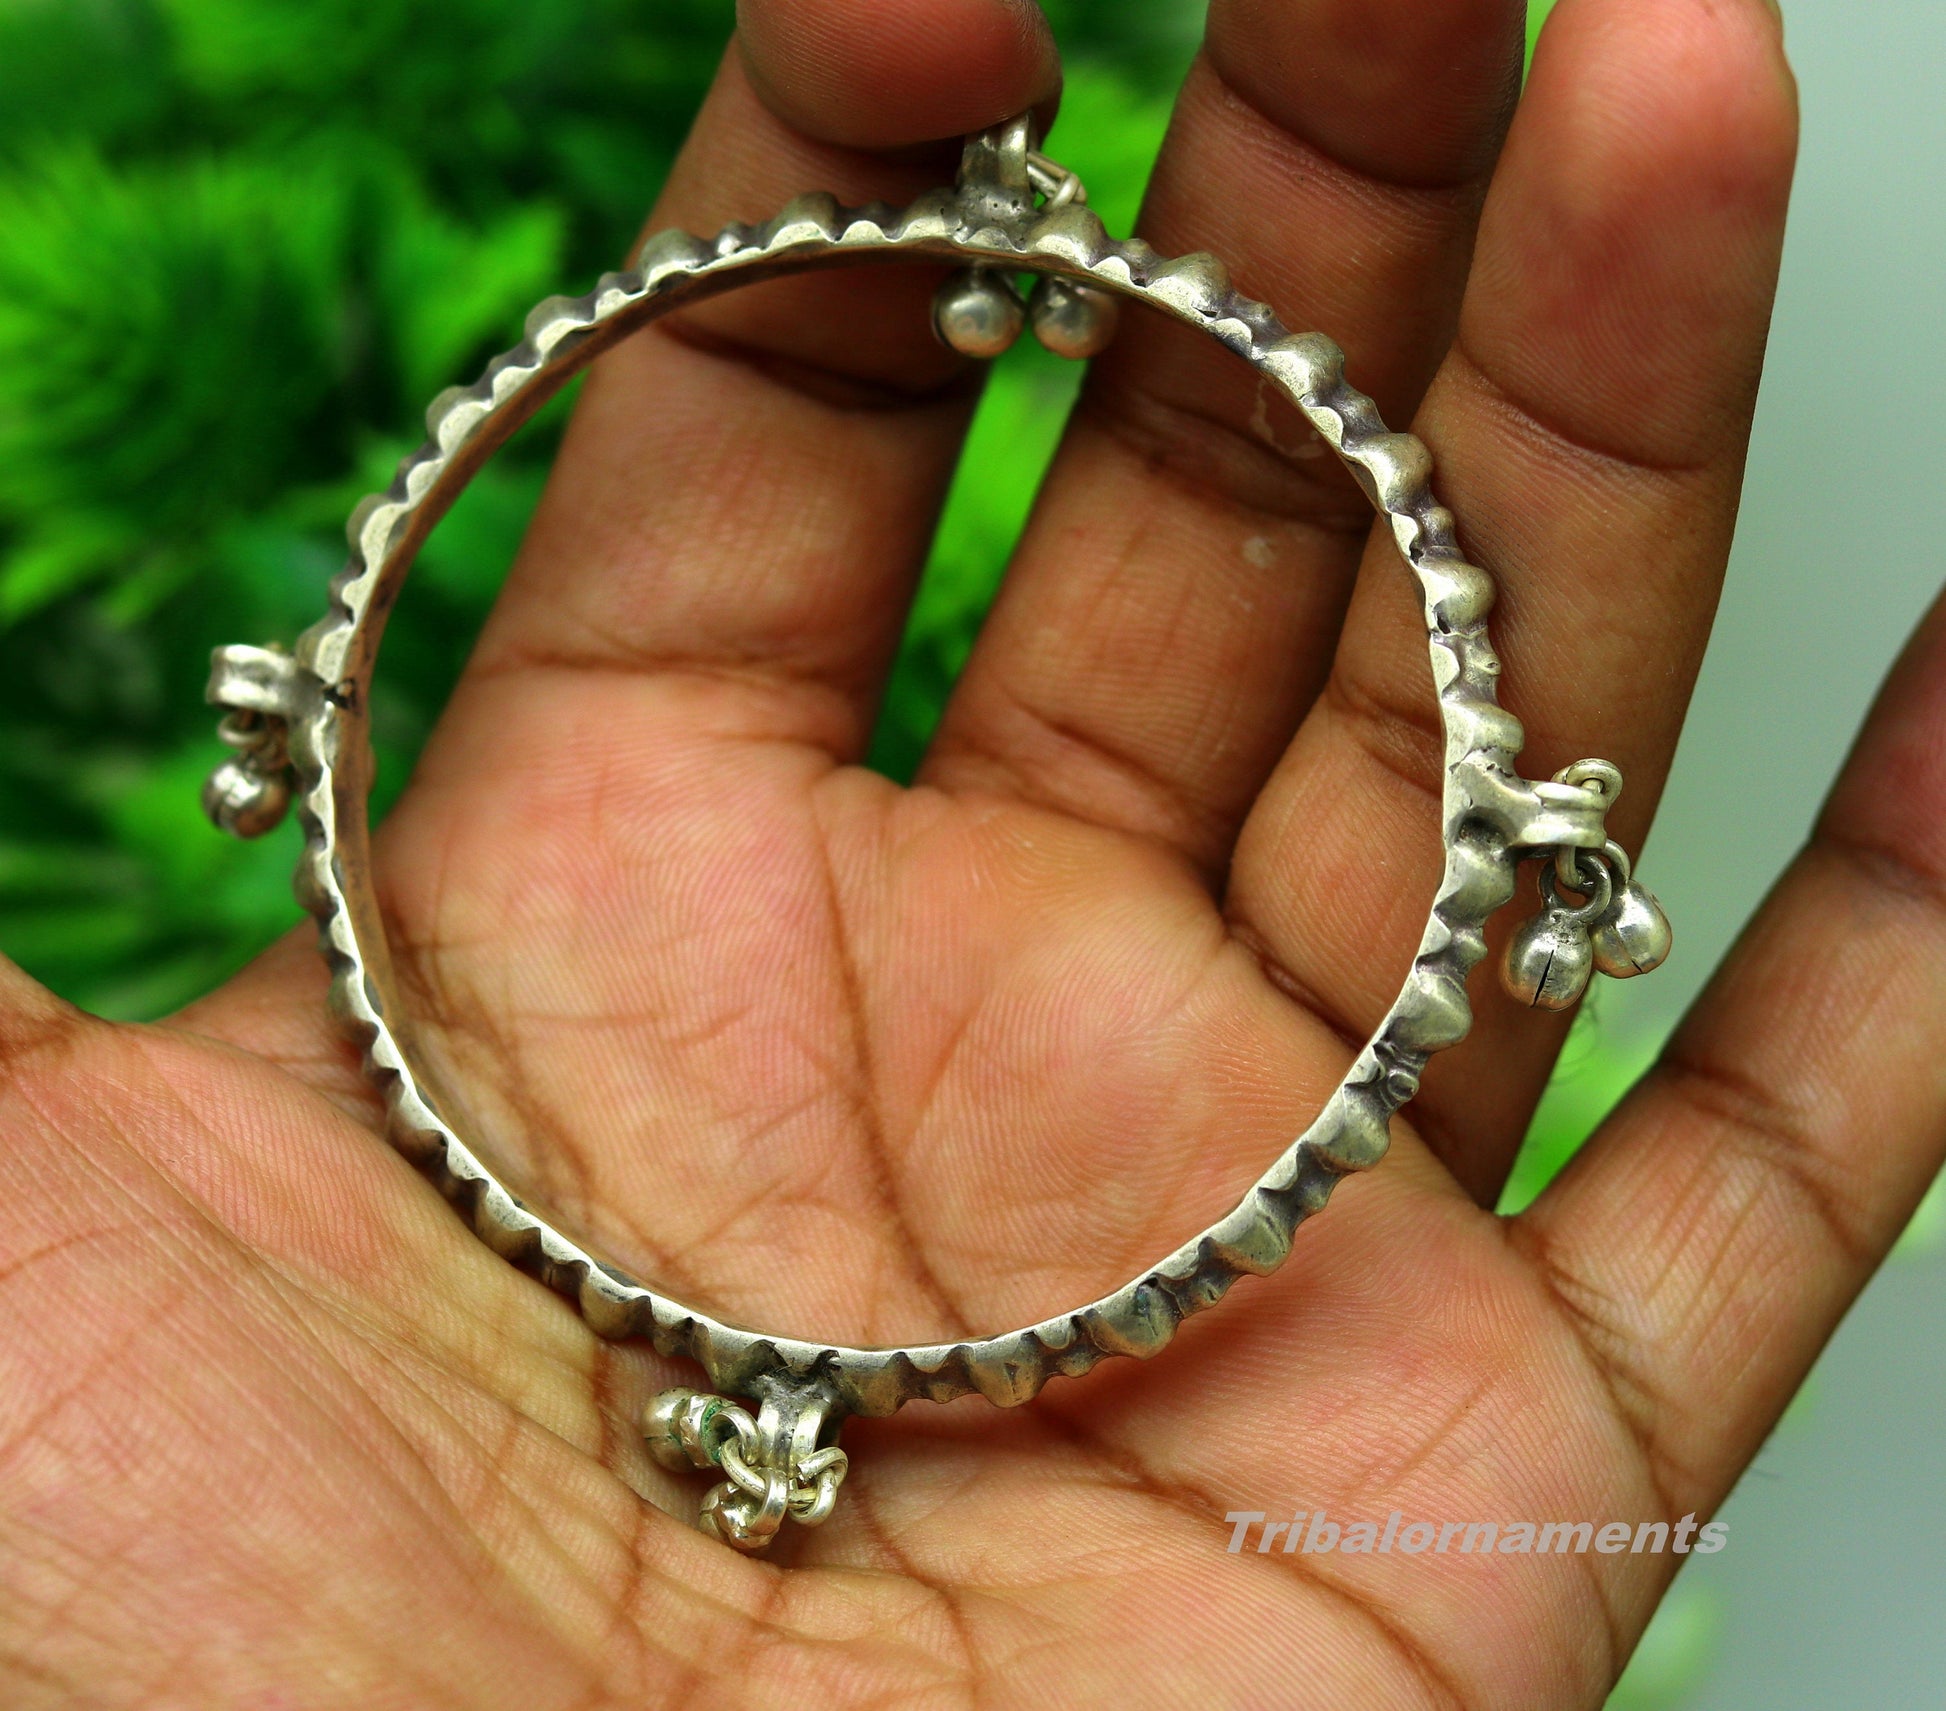 Vintage antique handmade solid silver old used charm bangle bracelet with gorgeous jingle bells tribal customized belly dance jewelry sba19 - TRIBAL ORNAMENTS